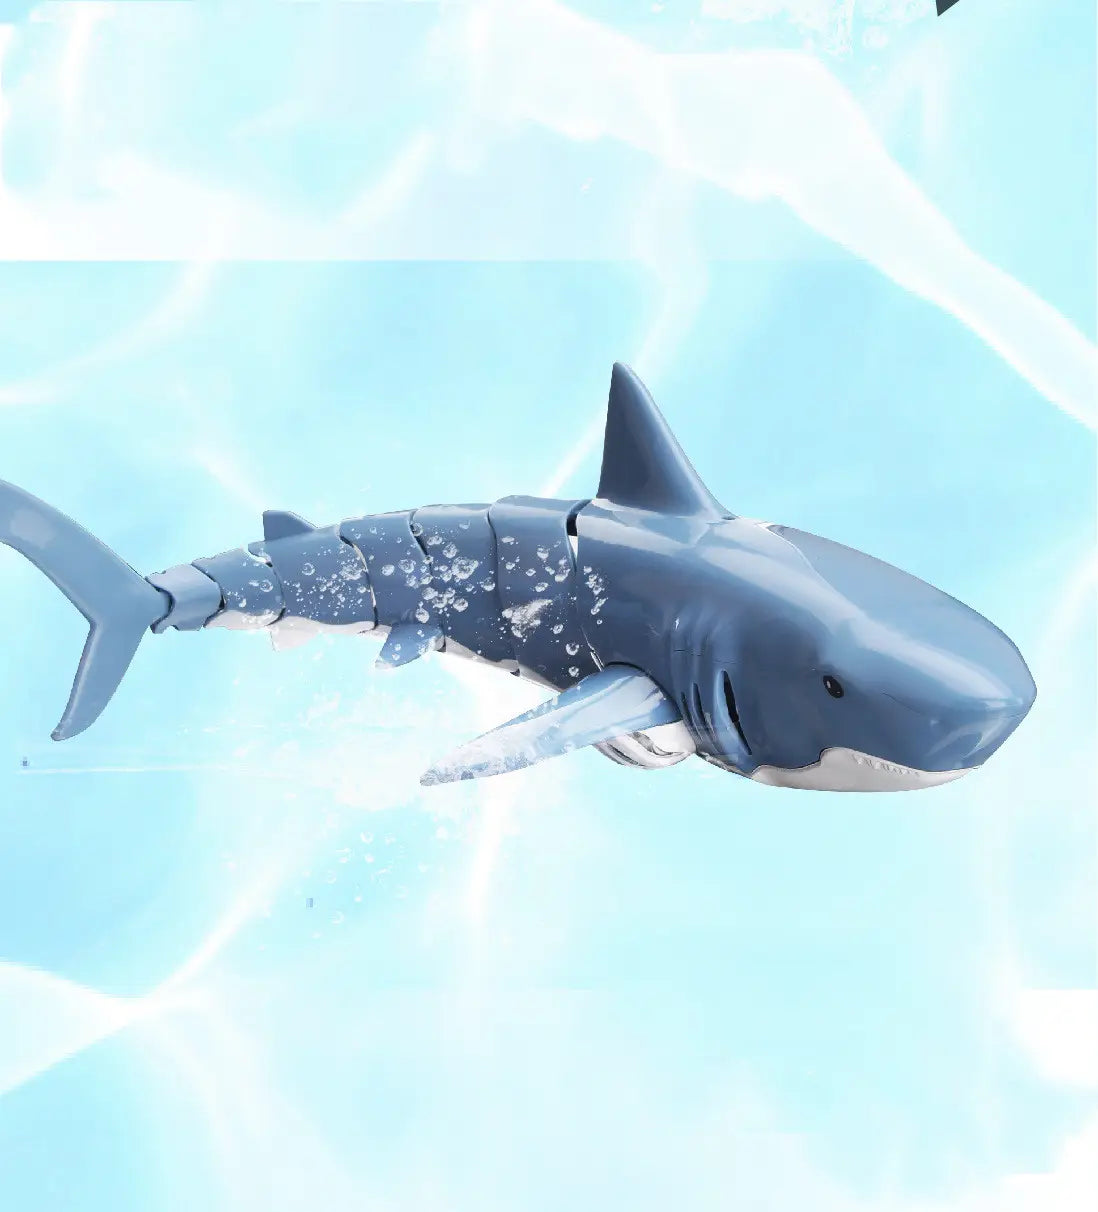 Remote Control Shark Toy